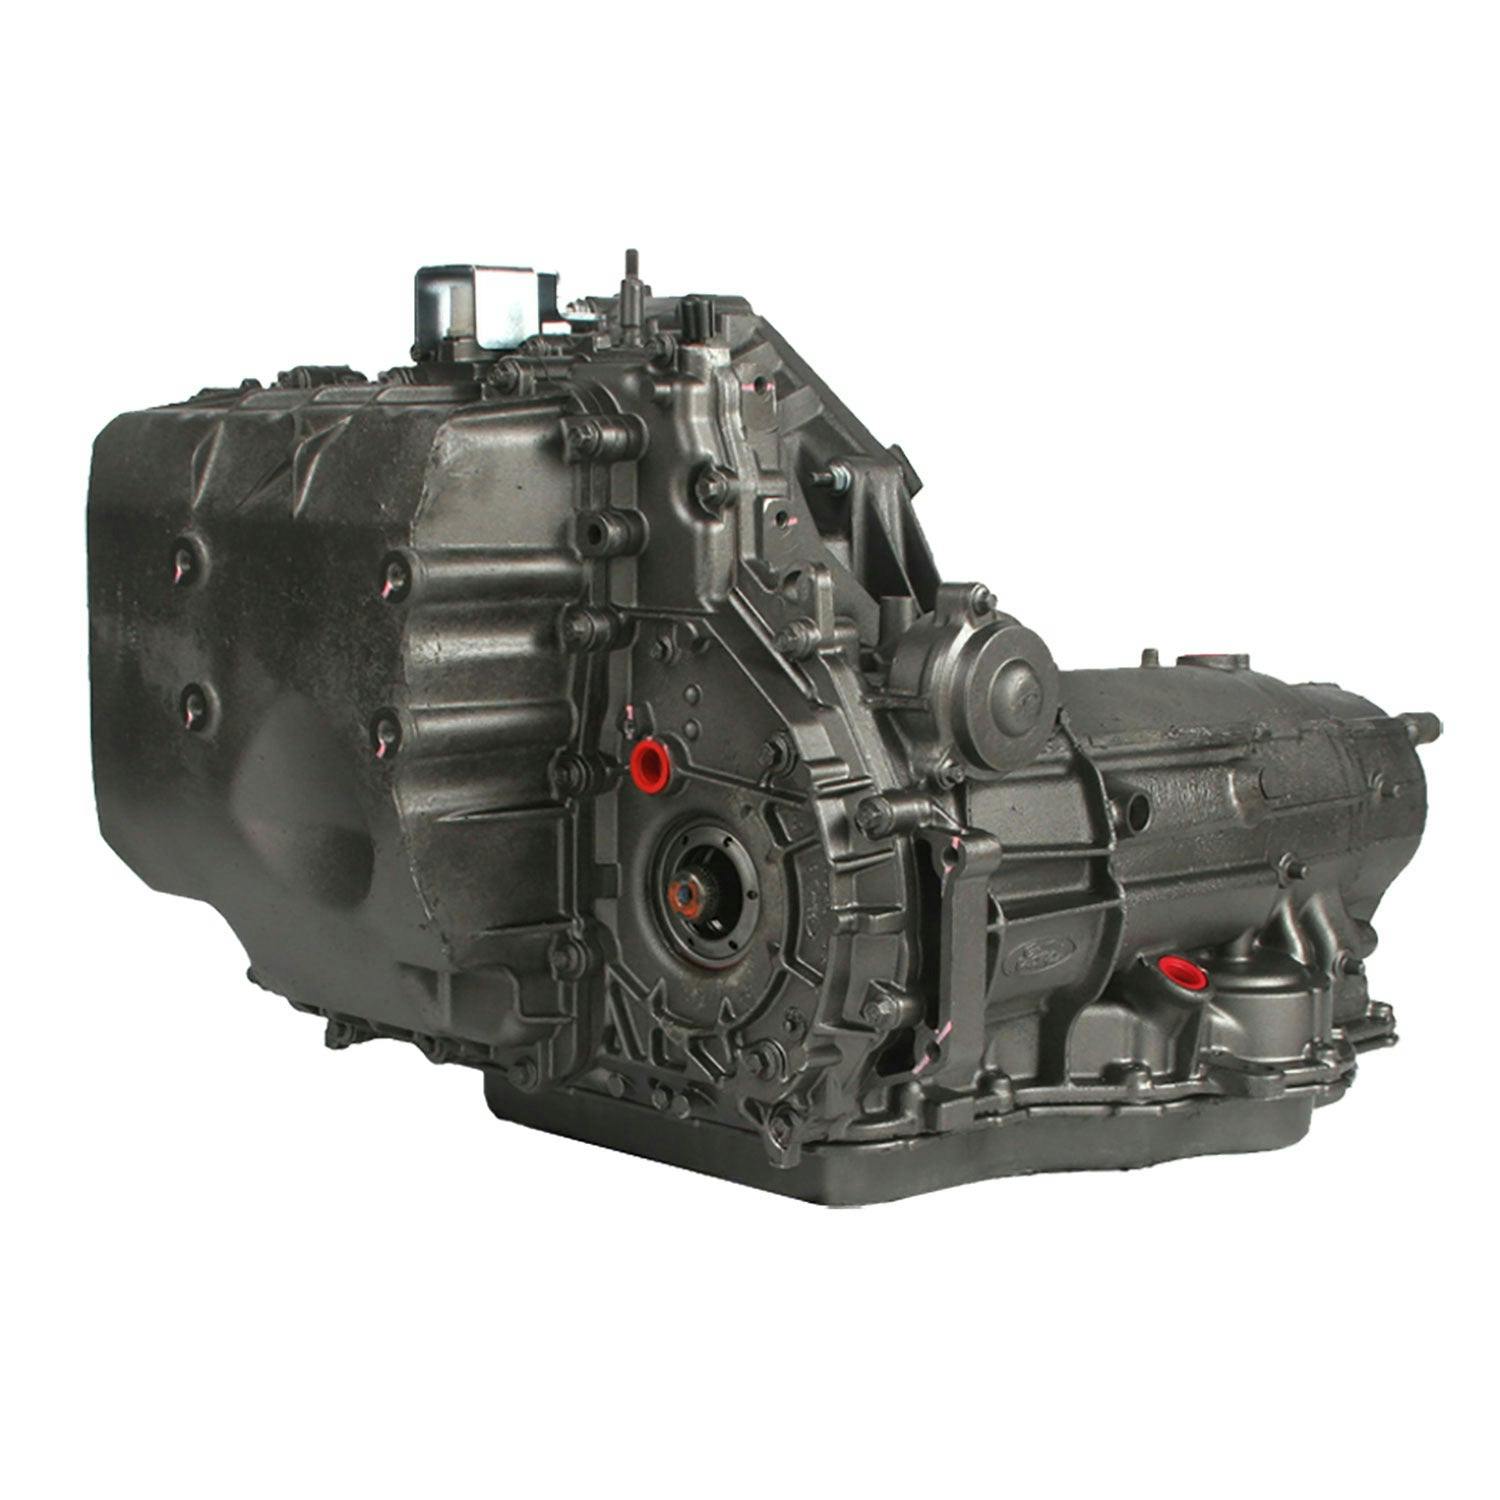 Automatic Transmission for 1998 Ford Taurus/Mercury Sable FWD with 3L V6 Engine